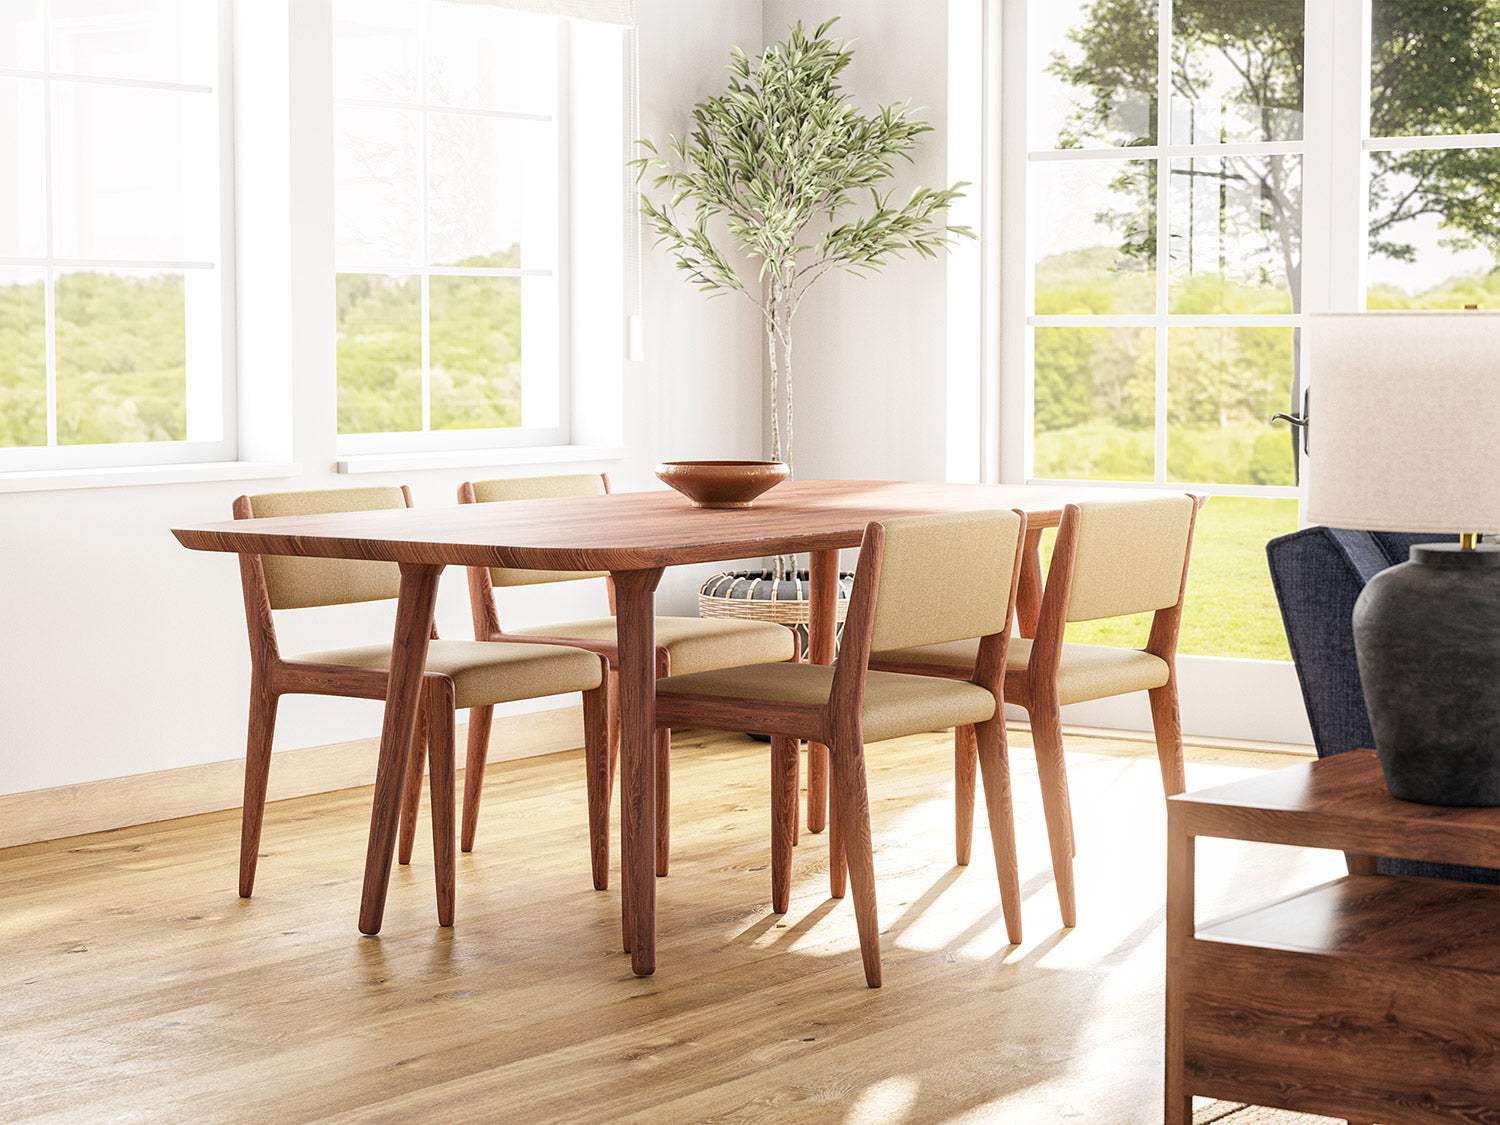 G: Low back version in walnut wood and Smart Wheat fabric with the Voya Rectangular Dining Table in walnut wood